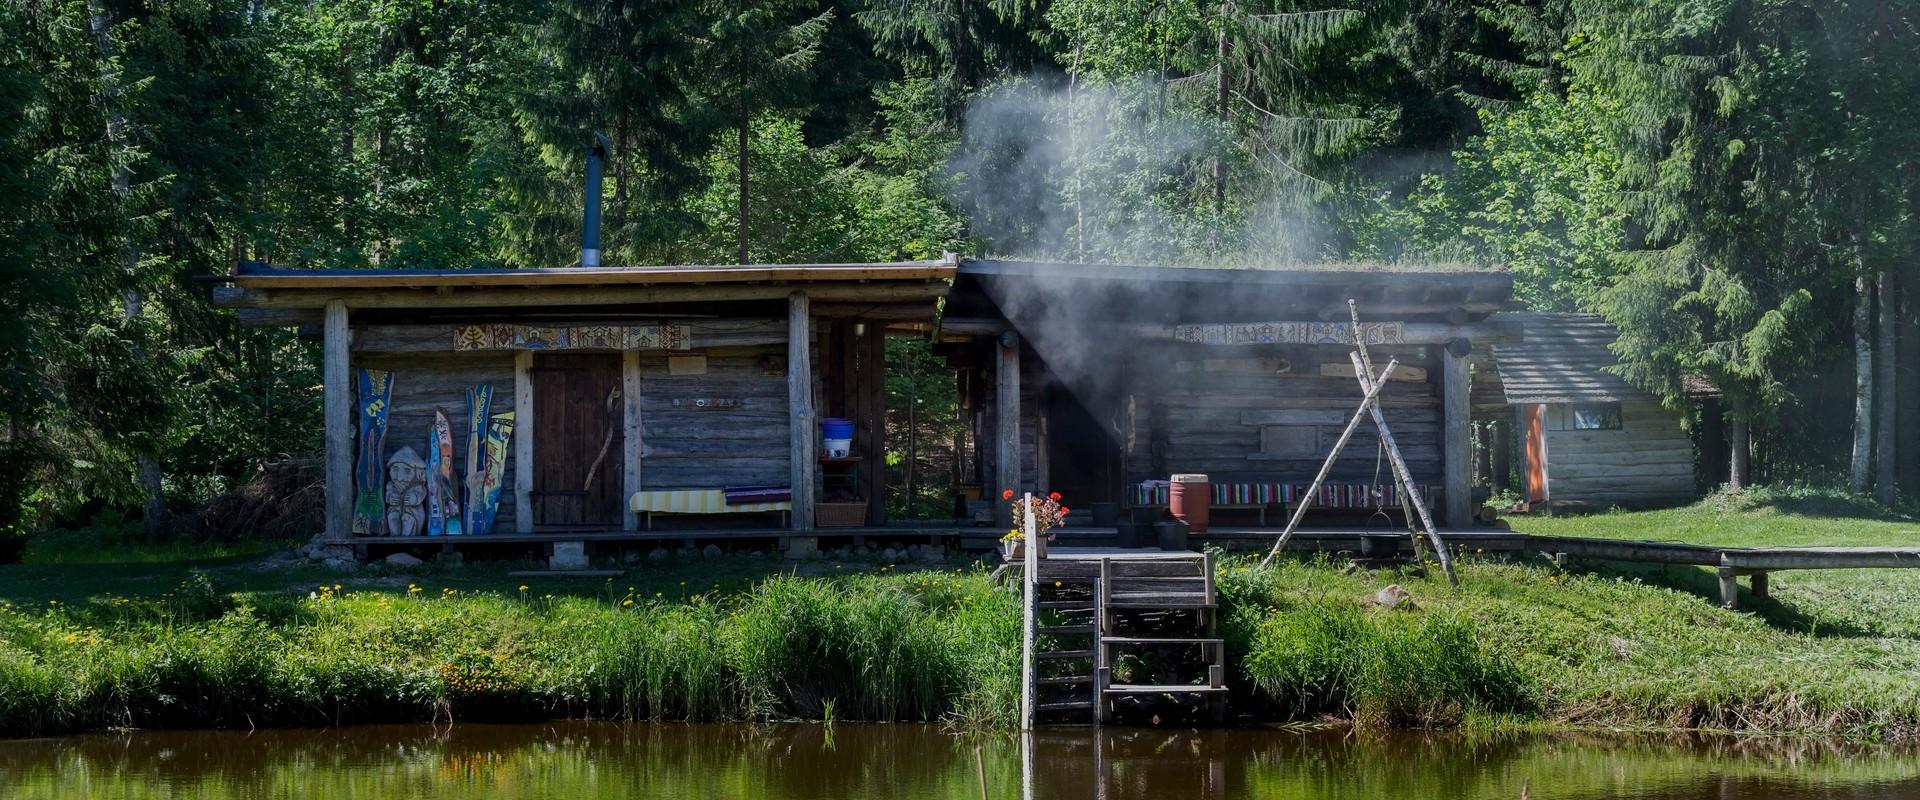 The Smoke sauna traditions of Old Võromaa have found their honoured spot on the list of UNESCO intangible cultural heritage of the world. At Mooska Fa